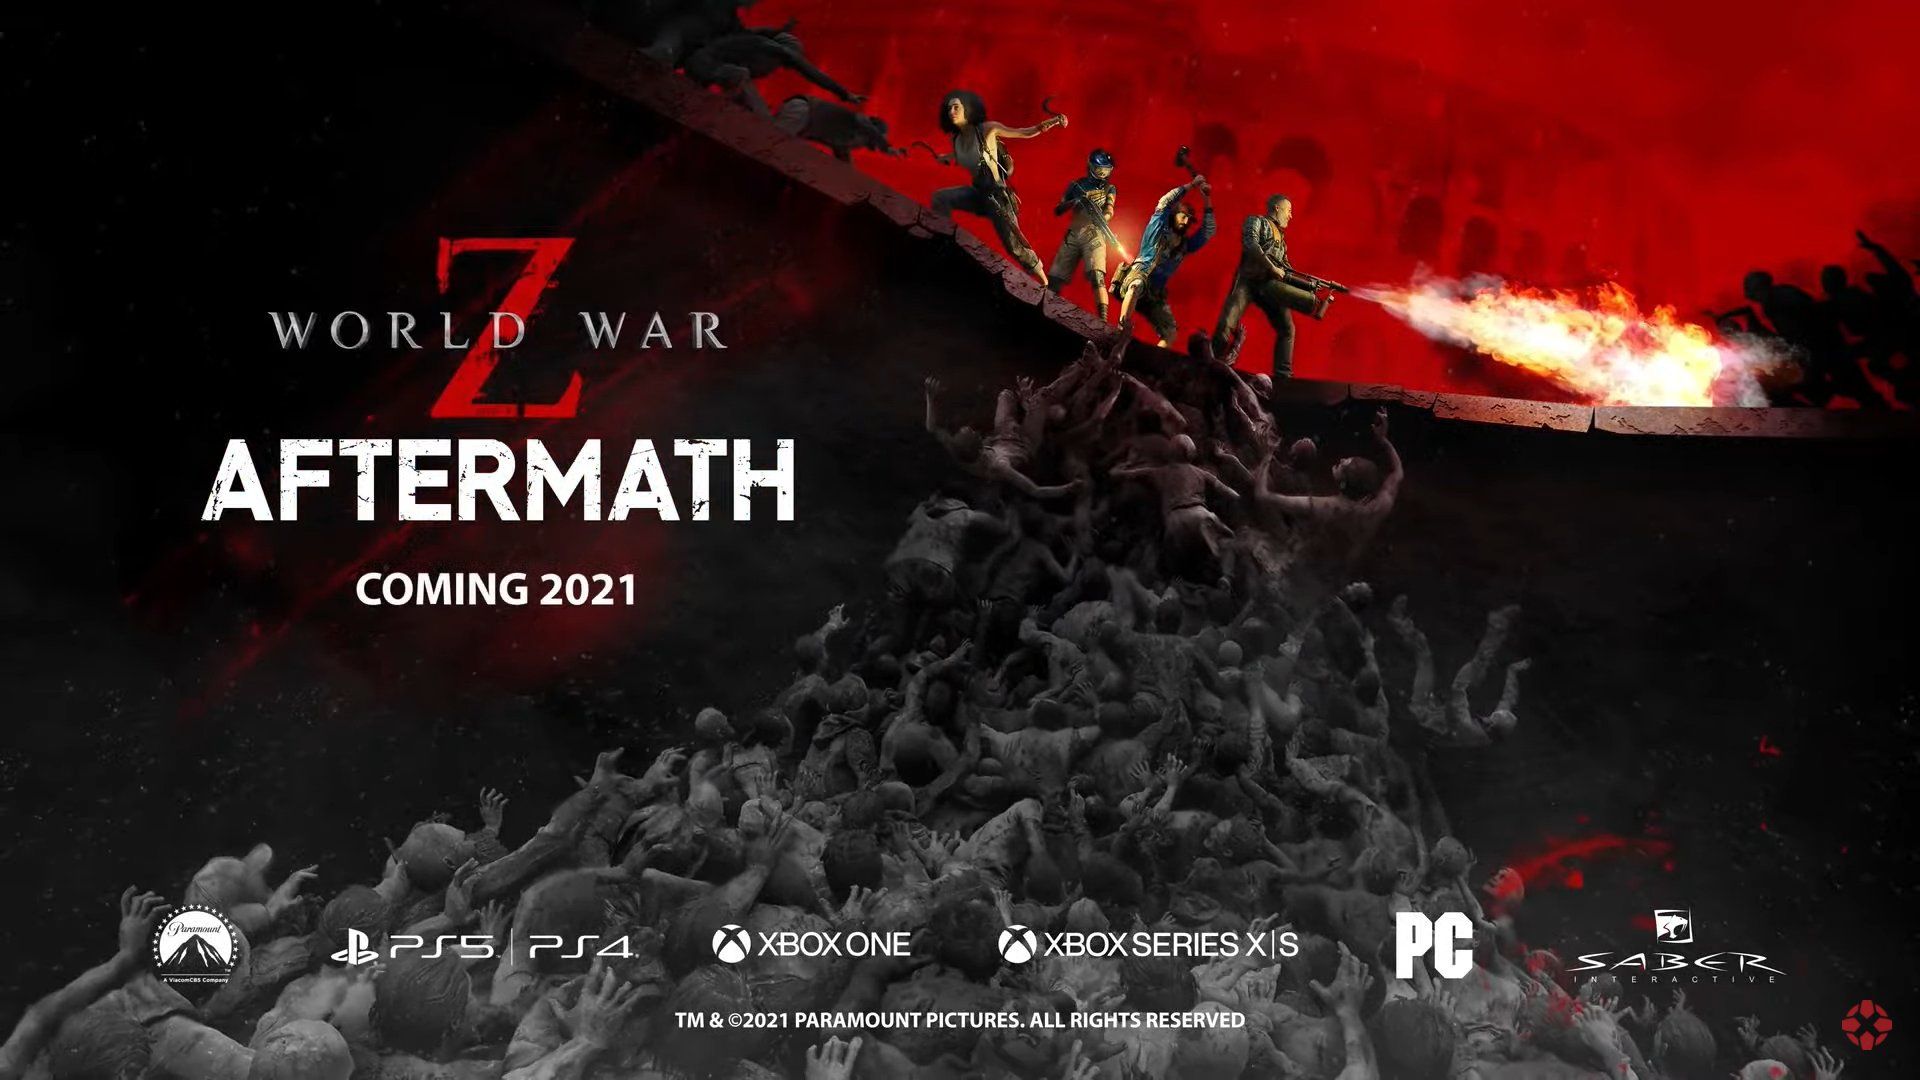 World War Z: Aftermath announced. PC News at New Game Network